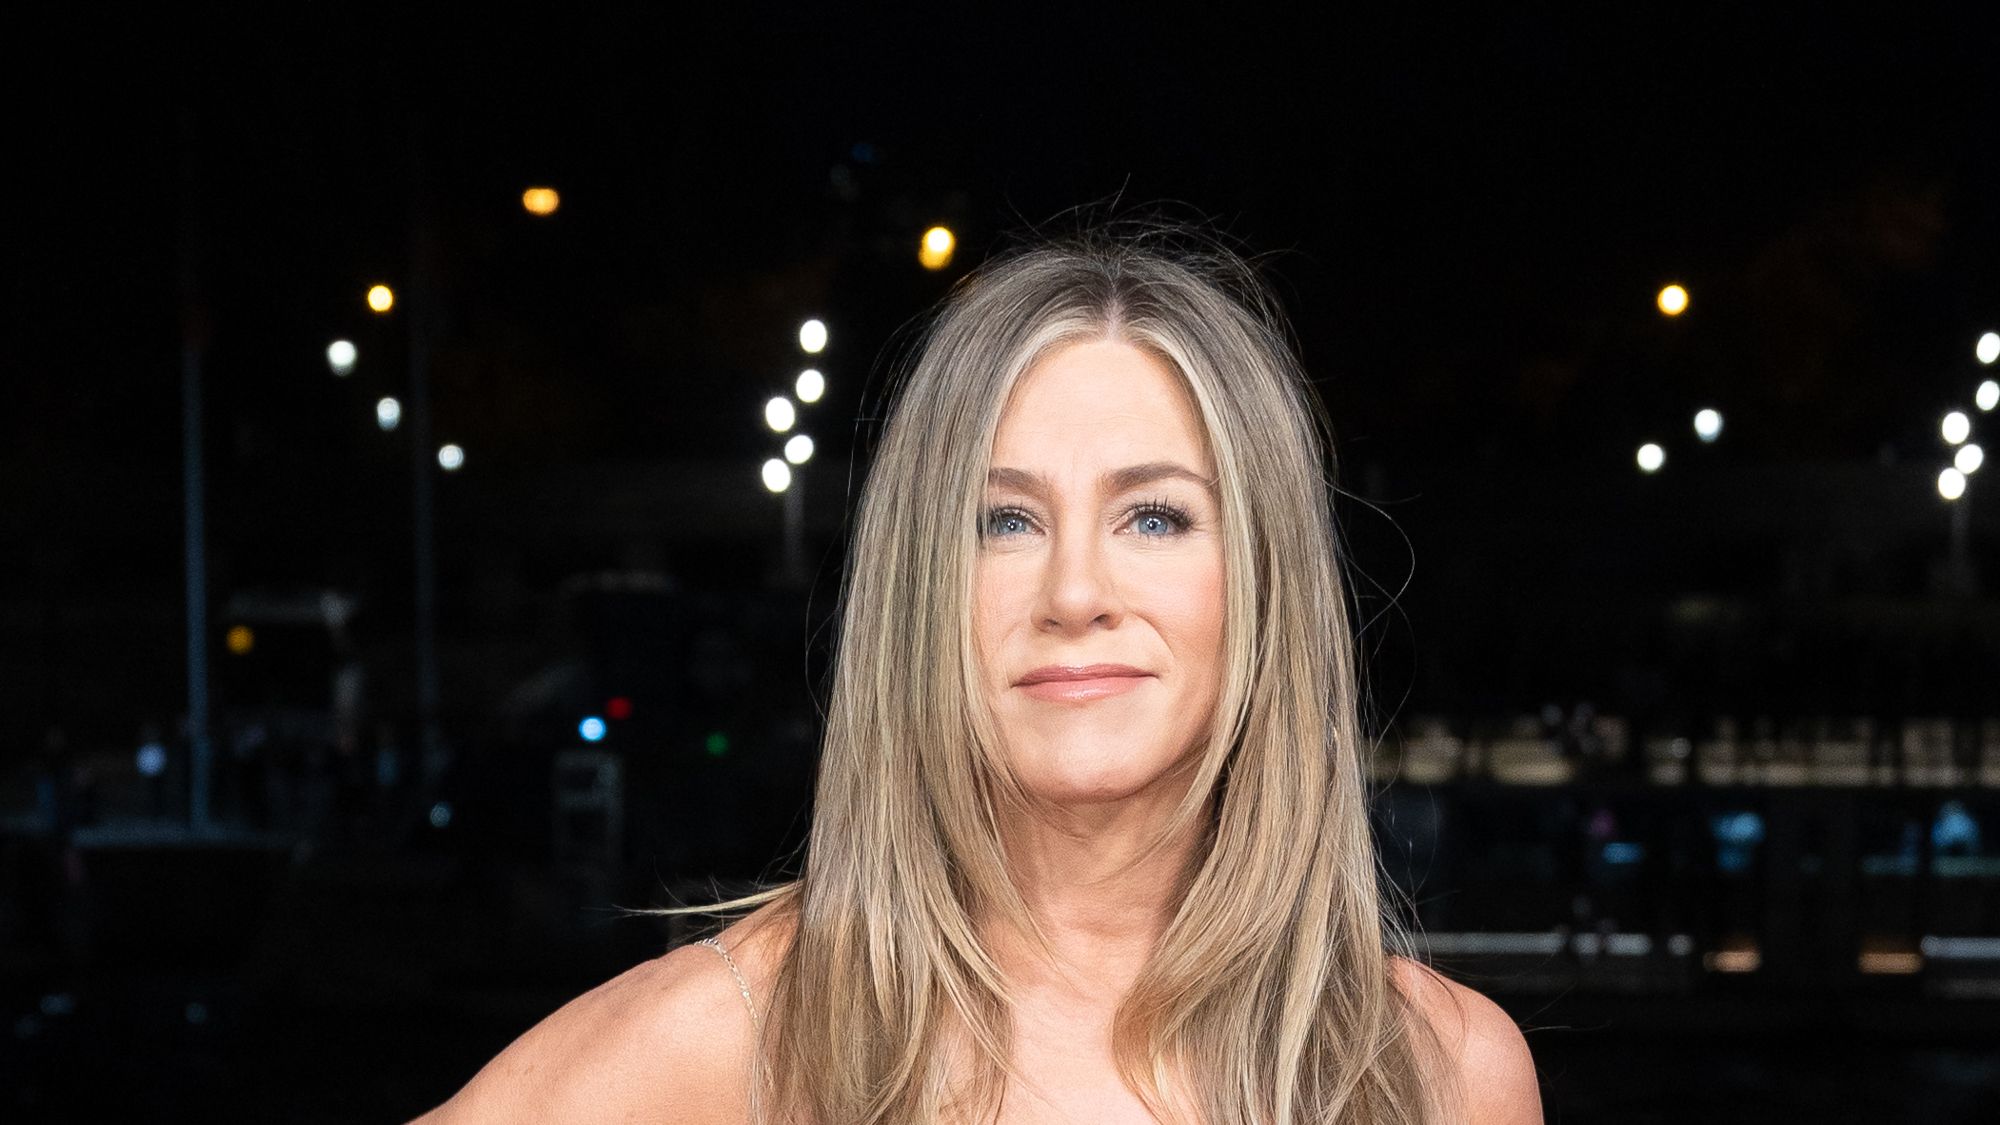 Jennifer Aniston Says She Feels Great in 'Mind, Body and Spirit